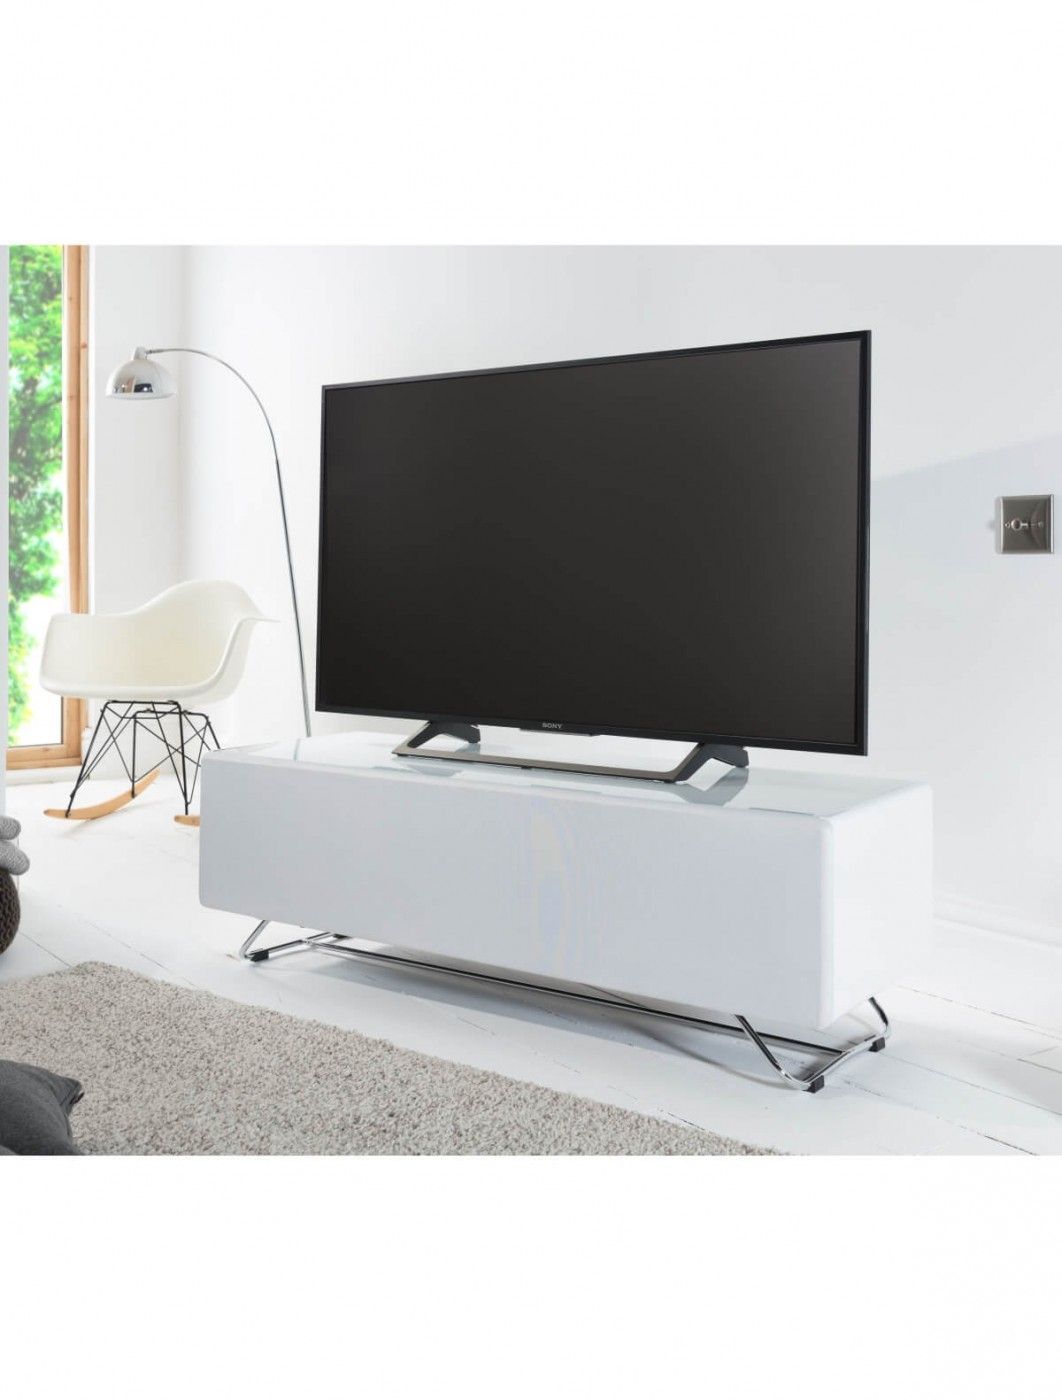 Tv Stand White Chromium Concept 1200mm Cro2 1200cpt Wh Within Chromium Tv Stands (View 12 of 15)